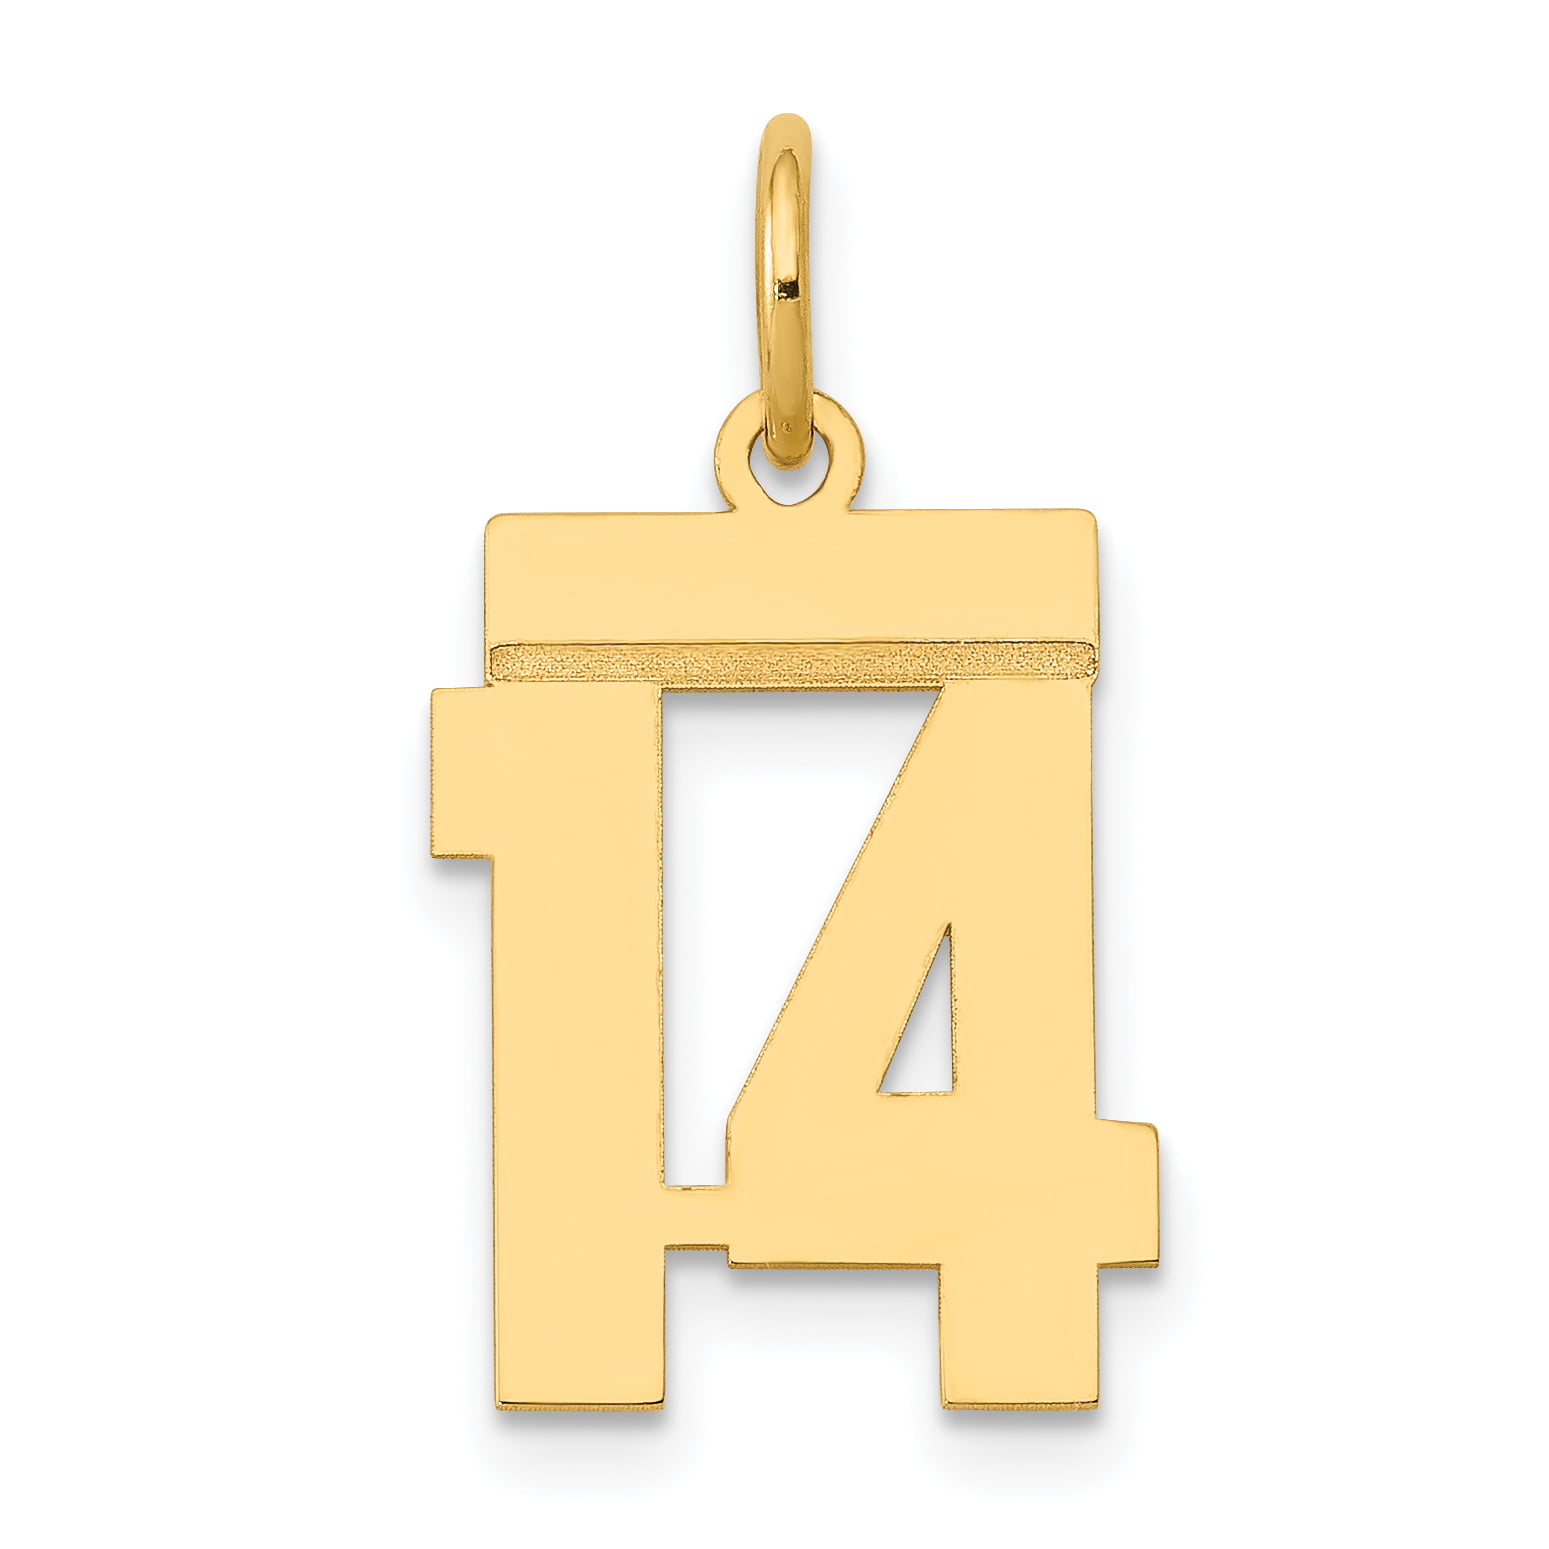 14k Small Satin Number 1 Charm Best Quality Free Gift Box 